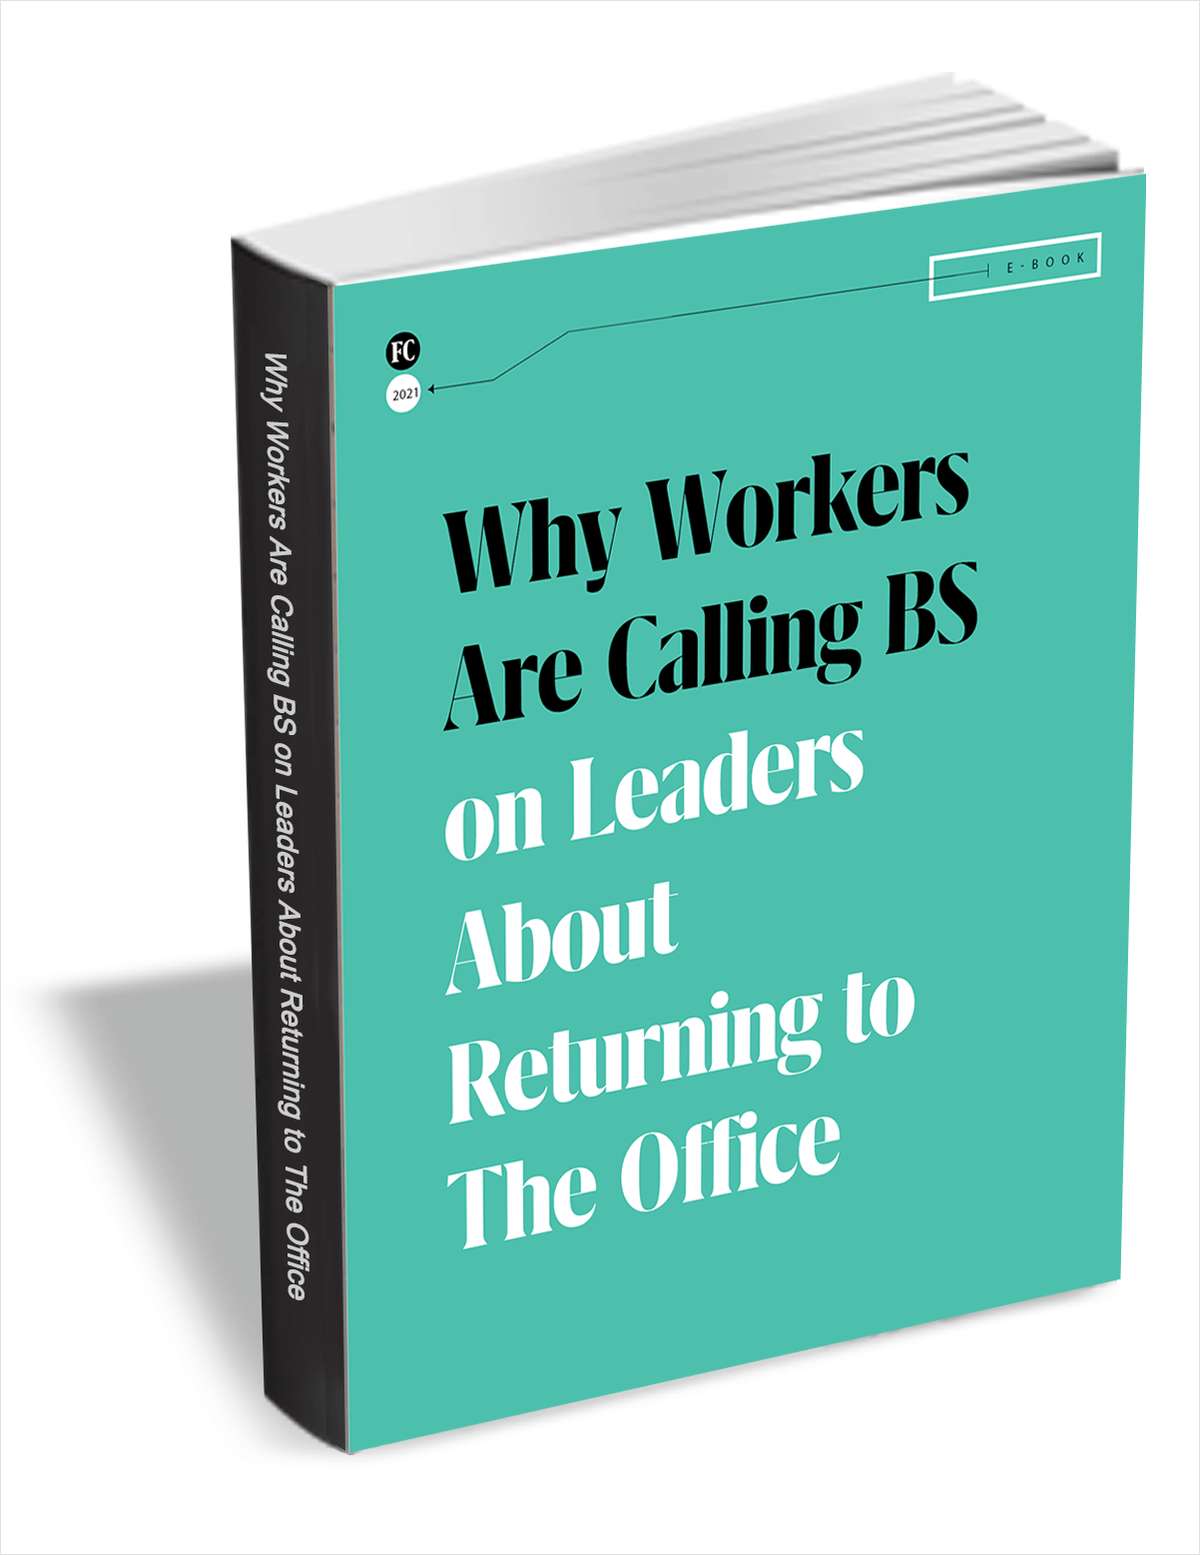 Why Workers Are Calling BS on Leaders About Returning to the Office